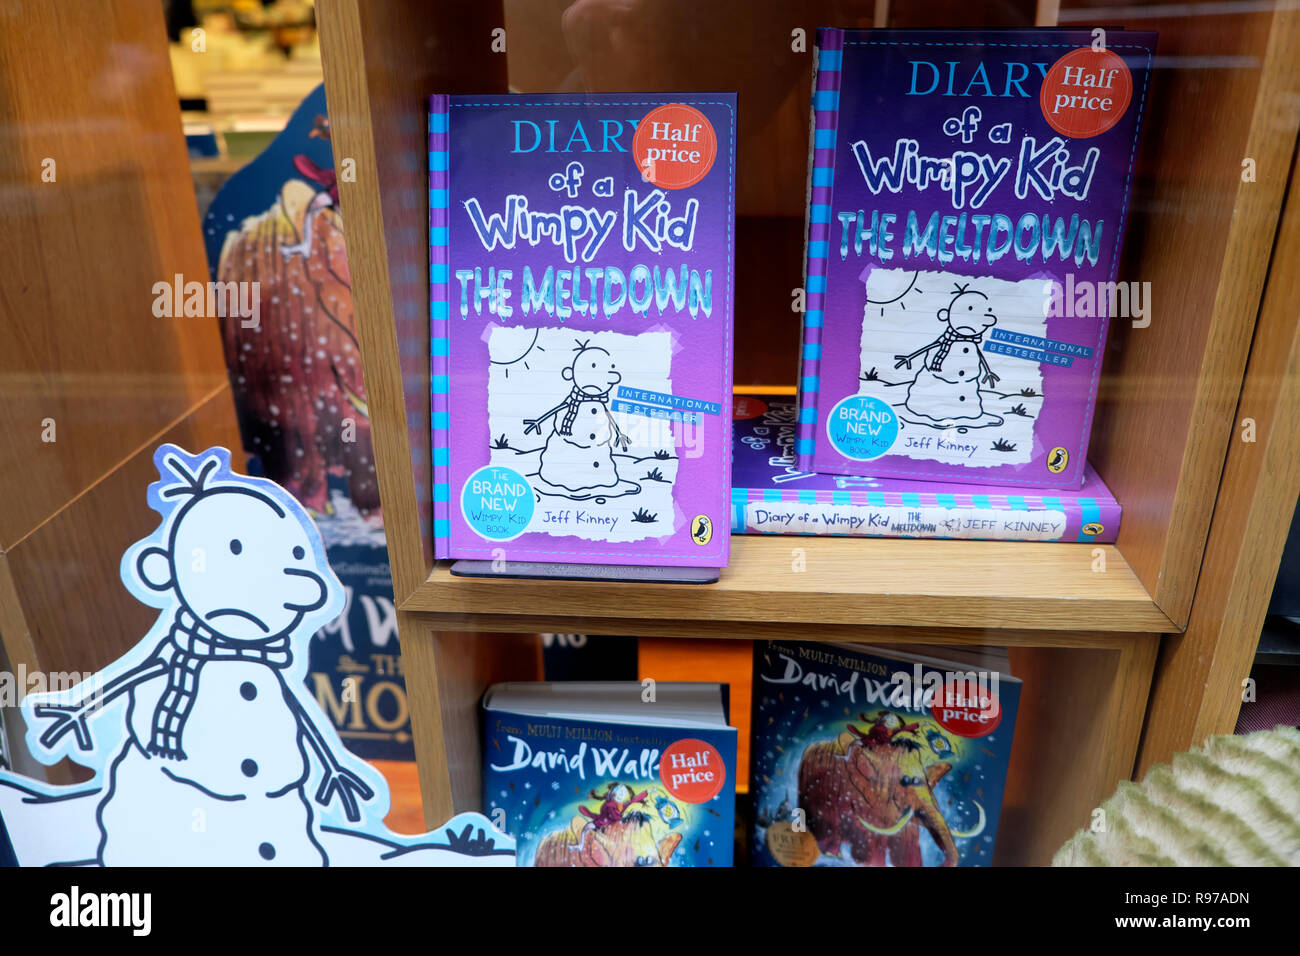 Waterstones book display Diary of a Wimpy Kid, The Meltdown in December 2018 London England UK  KATHY DEWITT Stock Photo